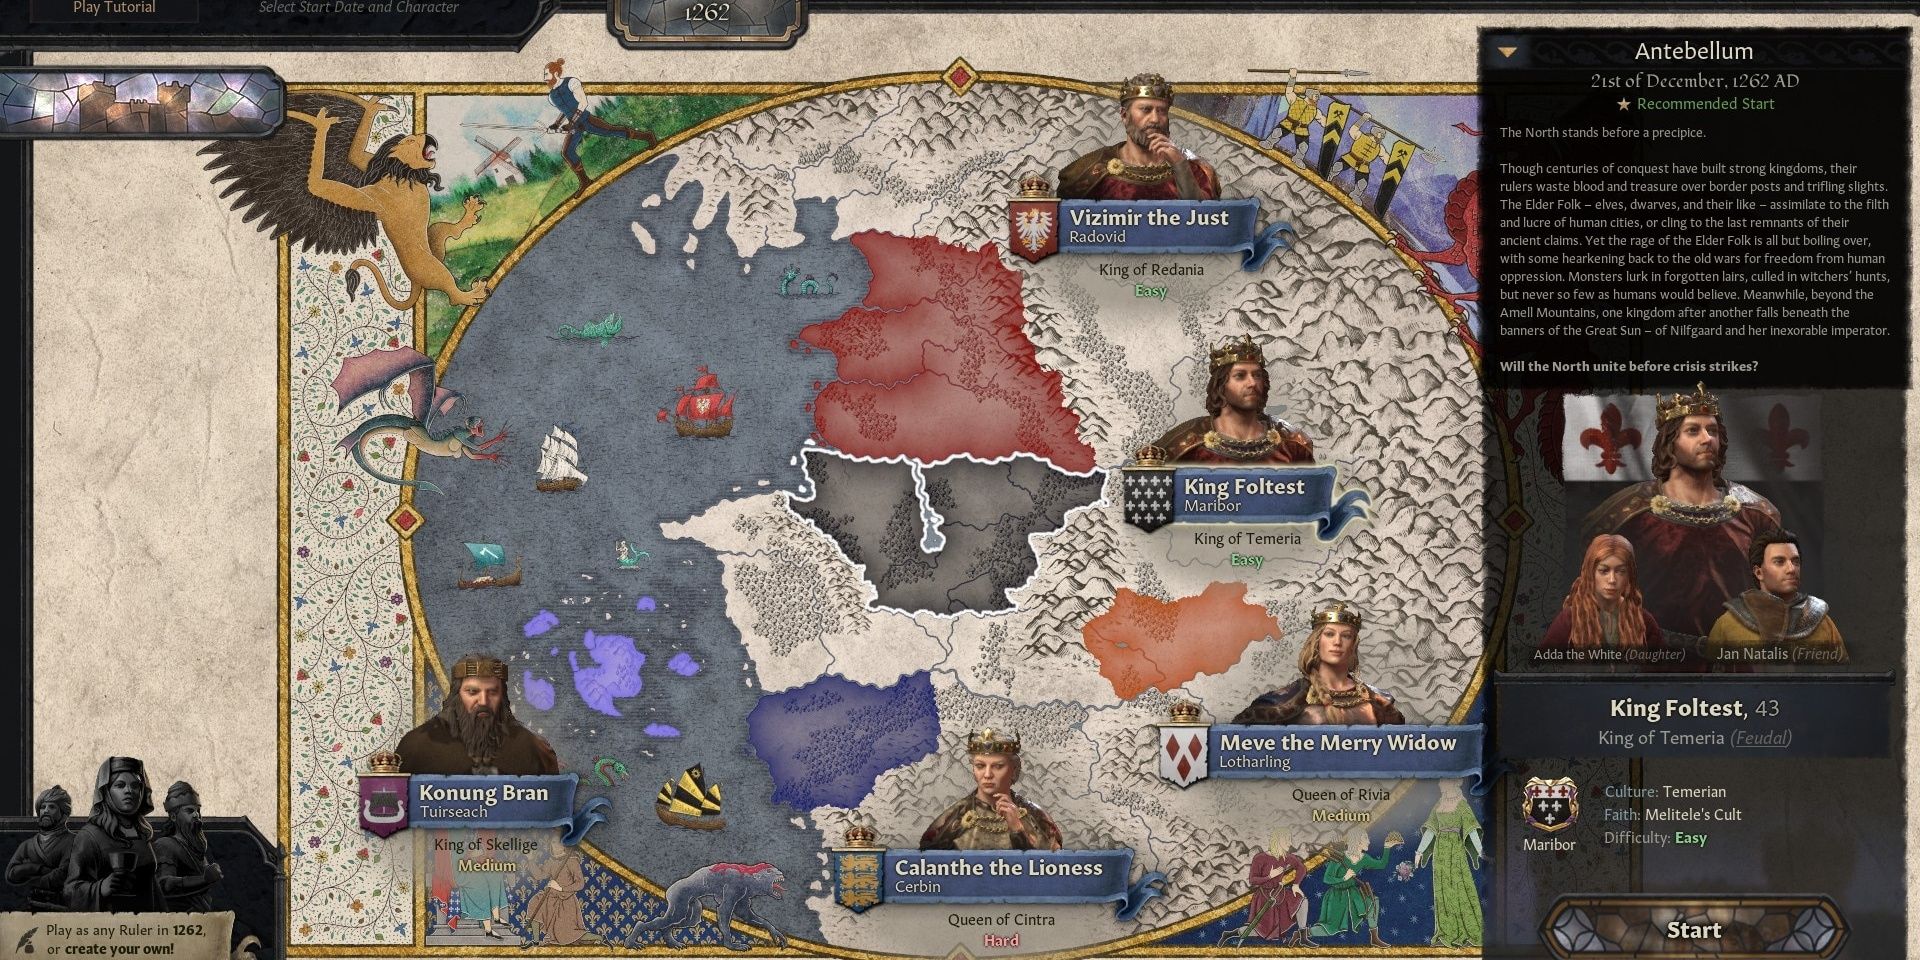 The Witcher's Realms mod for Crusader Kings 3